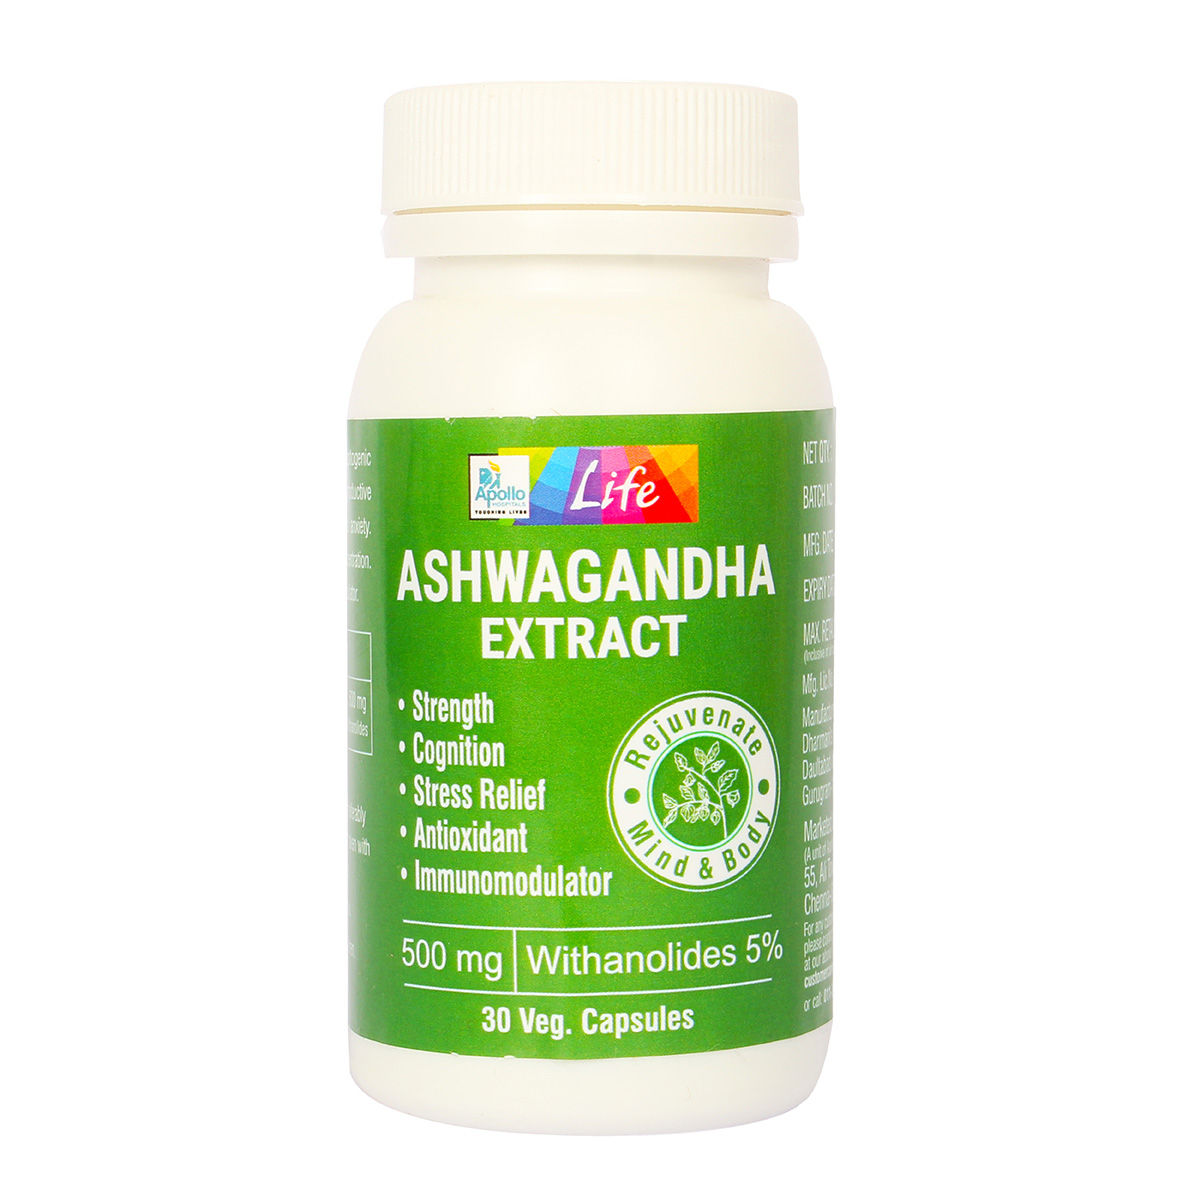 Apollo Life Ashwagandha Extract, 30 Capsules, Pack of 1 